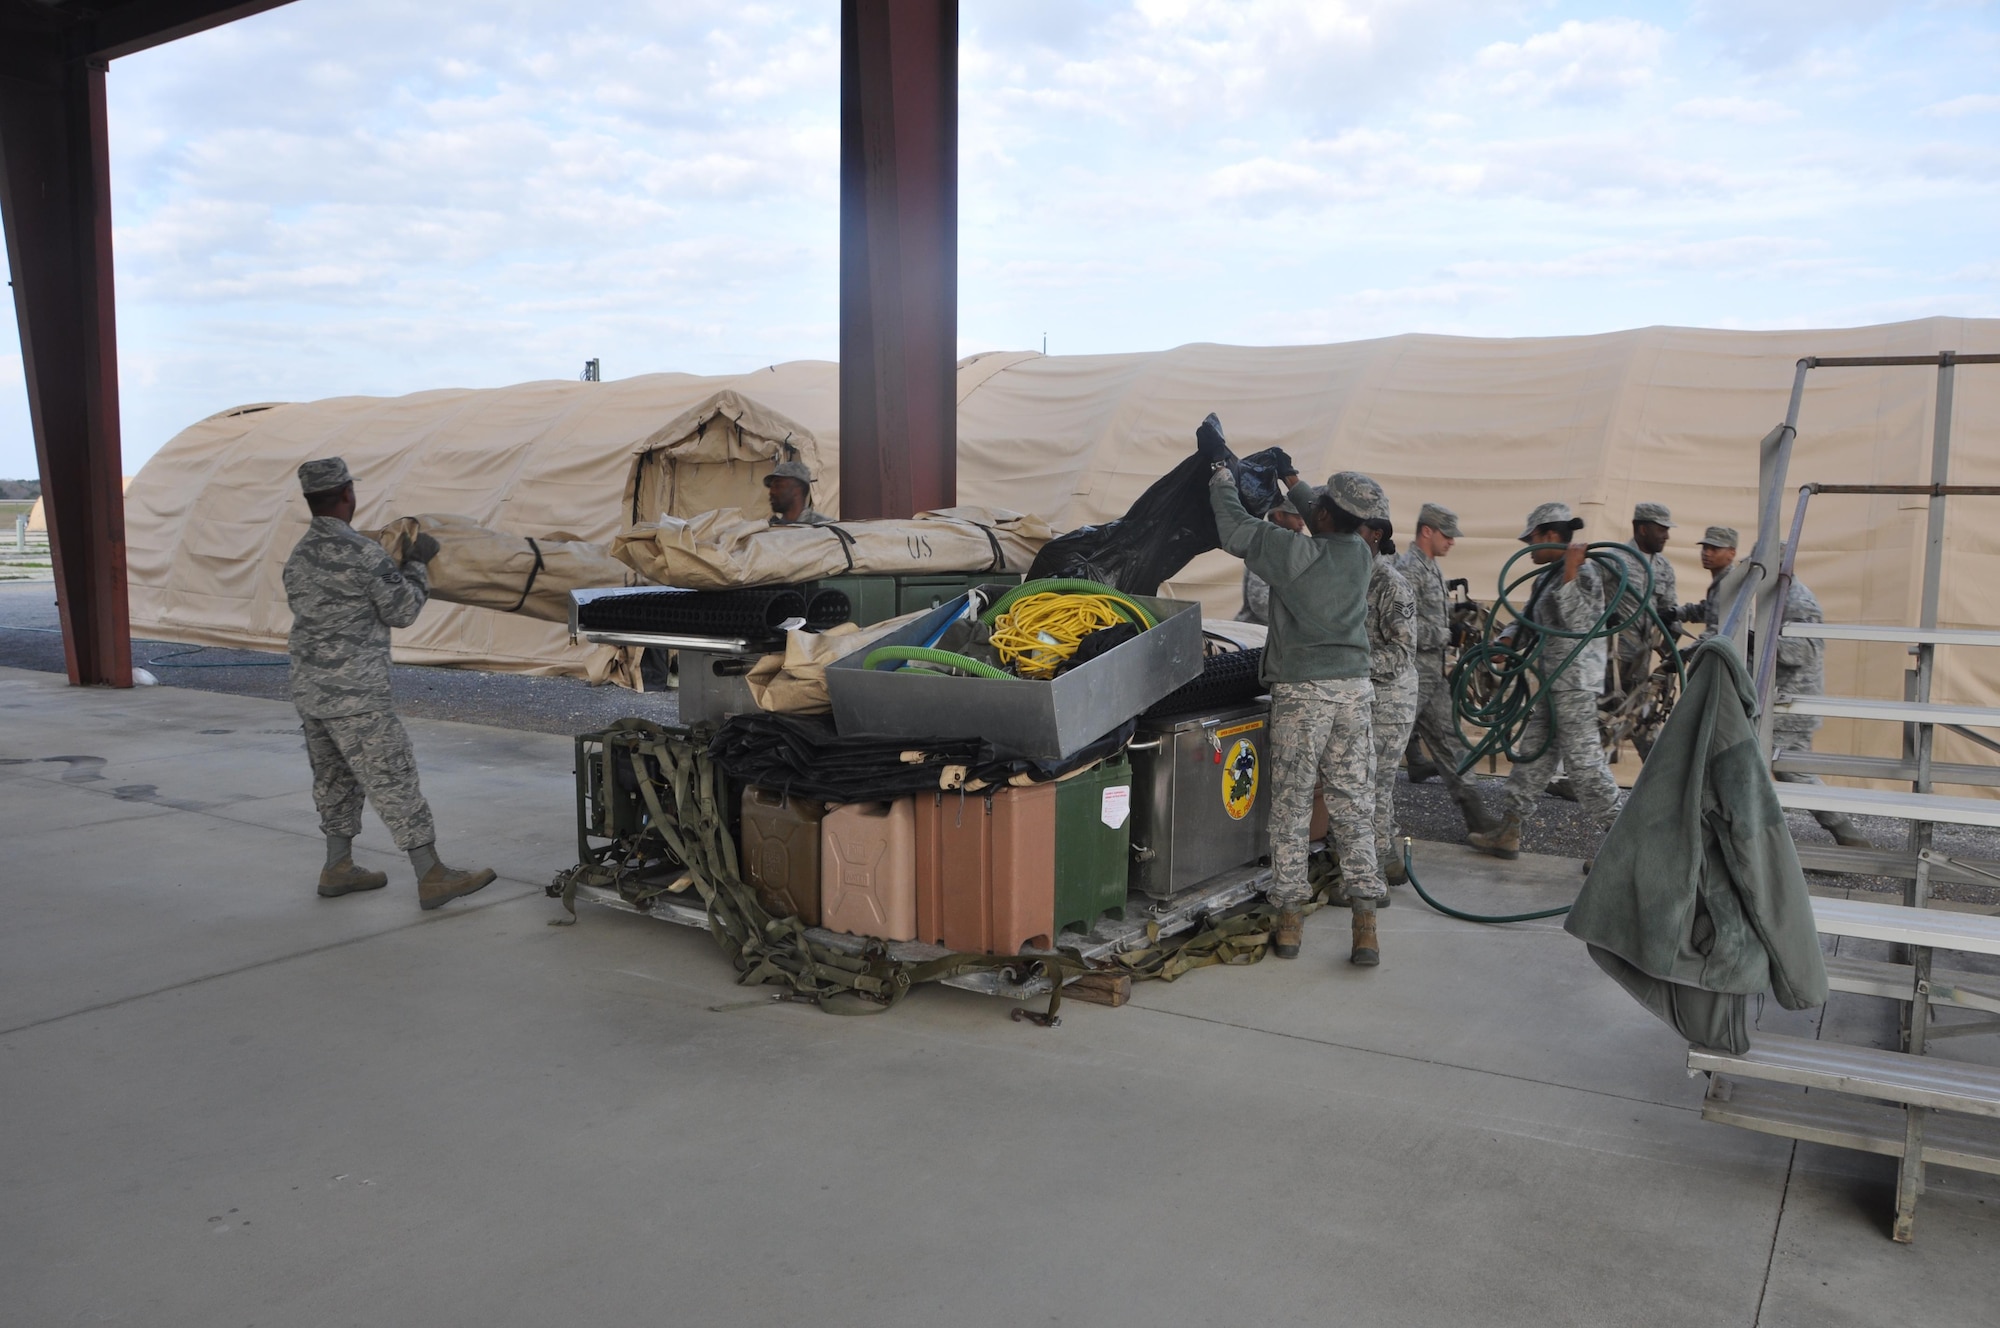 Members of the 908th Airlift Wing’s Force Support Squadron unload a pallet at the start of the Hennessy Competition Feb. 11 at Maxwell Air Force Base. The 908th is one of four teams competing for the John L. Hennessy Award that recognizes those who best excel in food service. (U.S. Air Force photo by Bradley J. Clark)